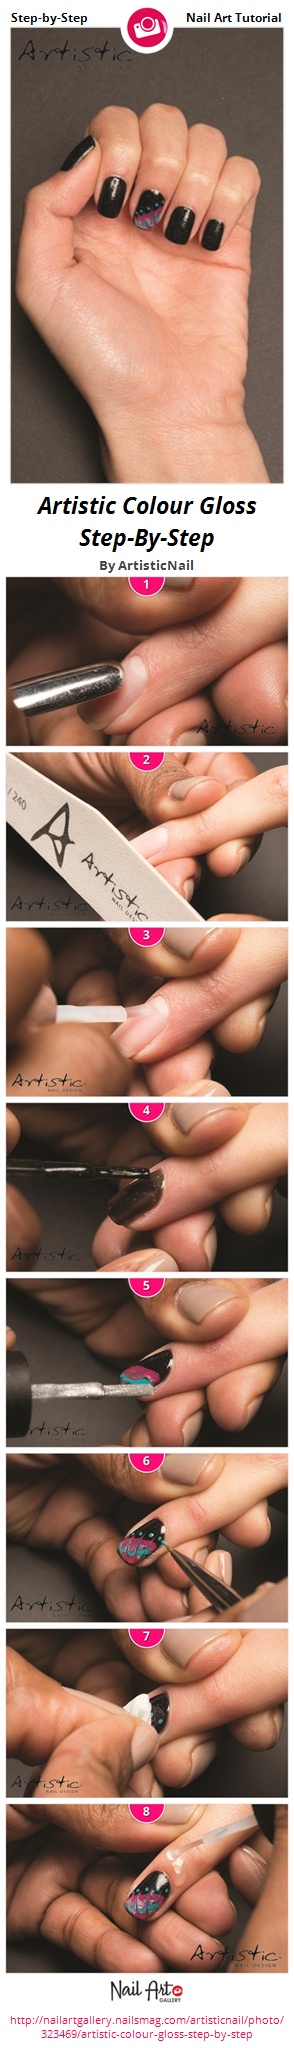 Artistic Colour Gloss Step-By-Step - Nail Art Gallery